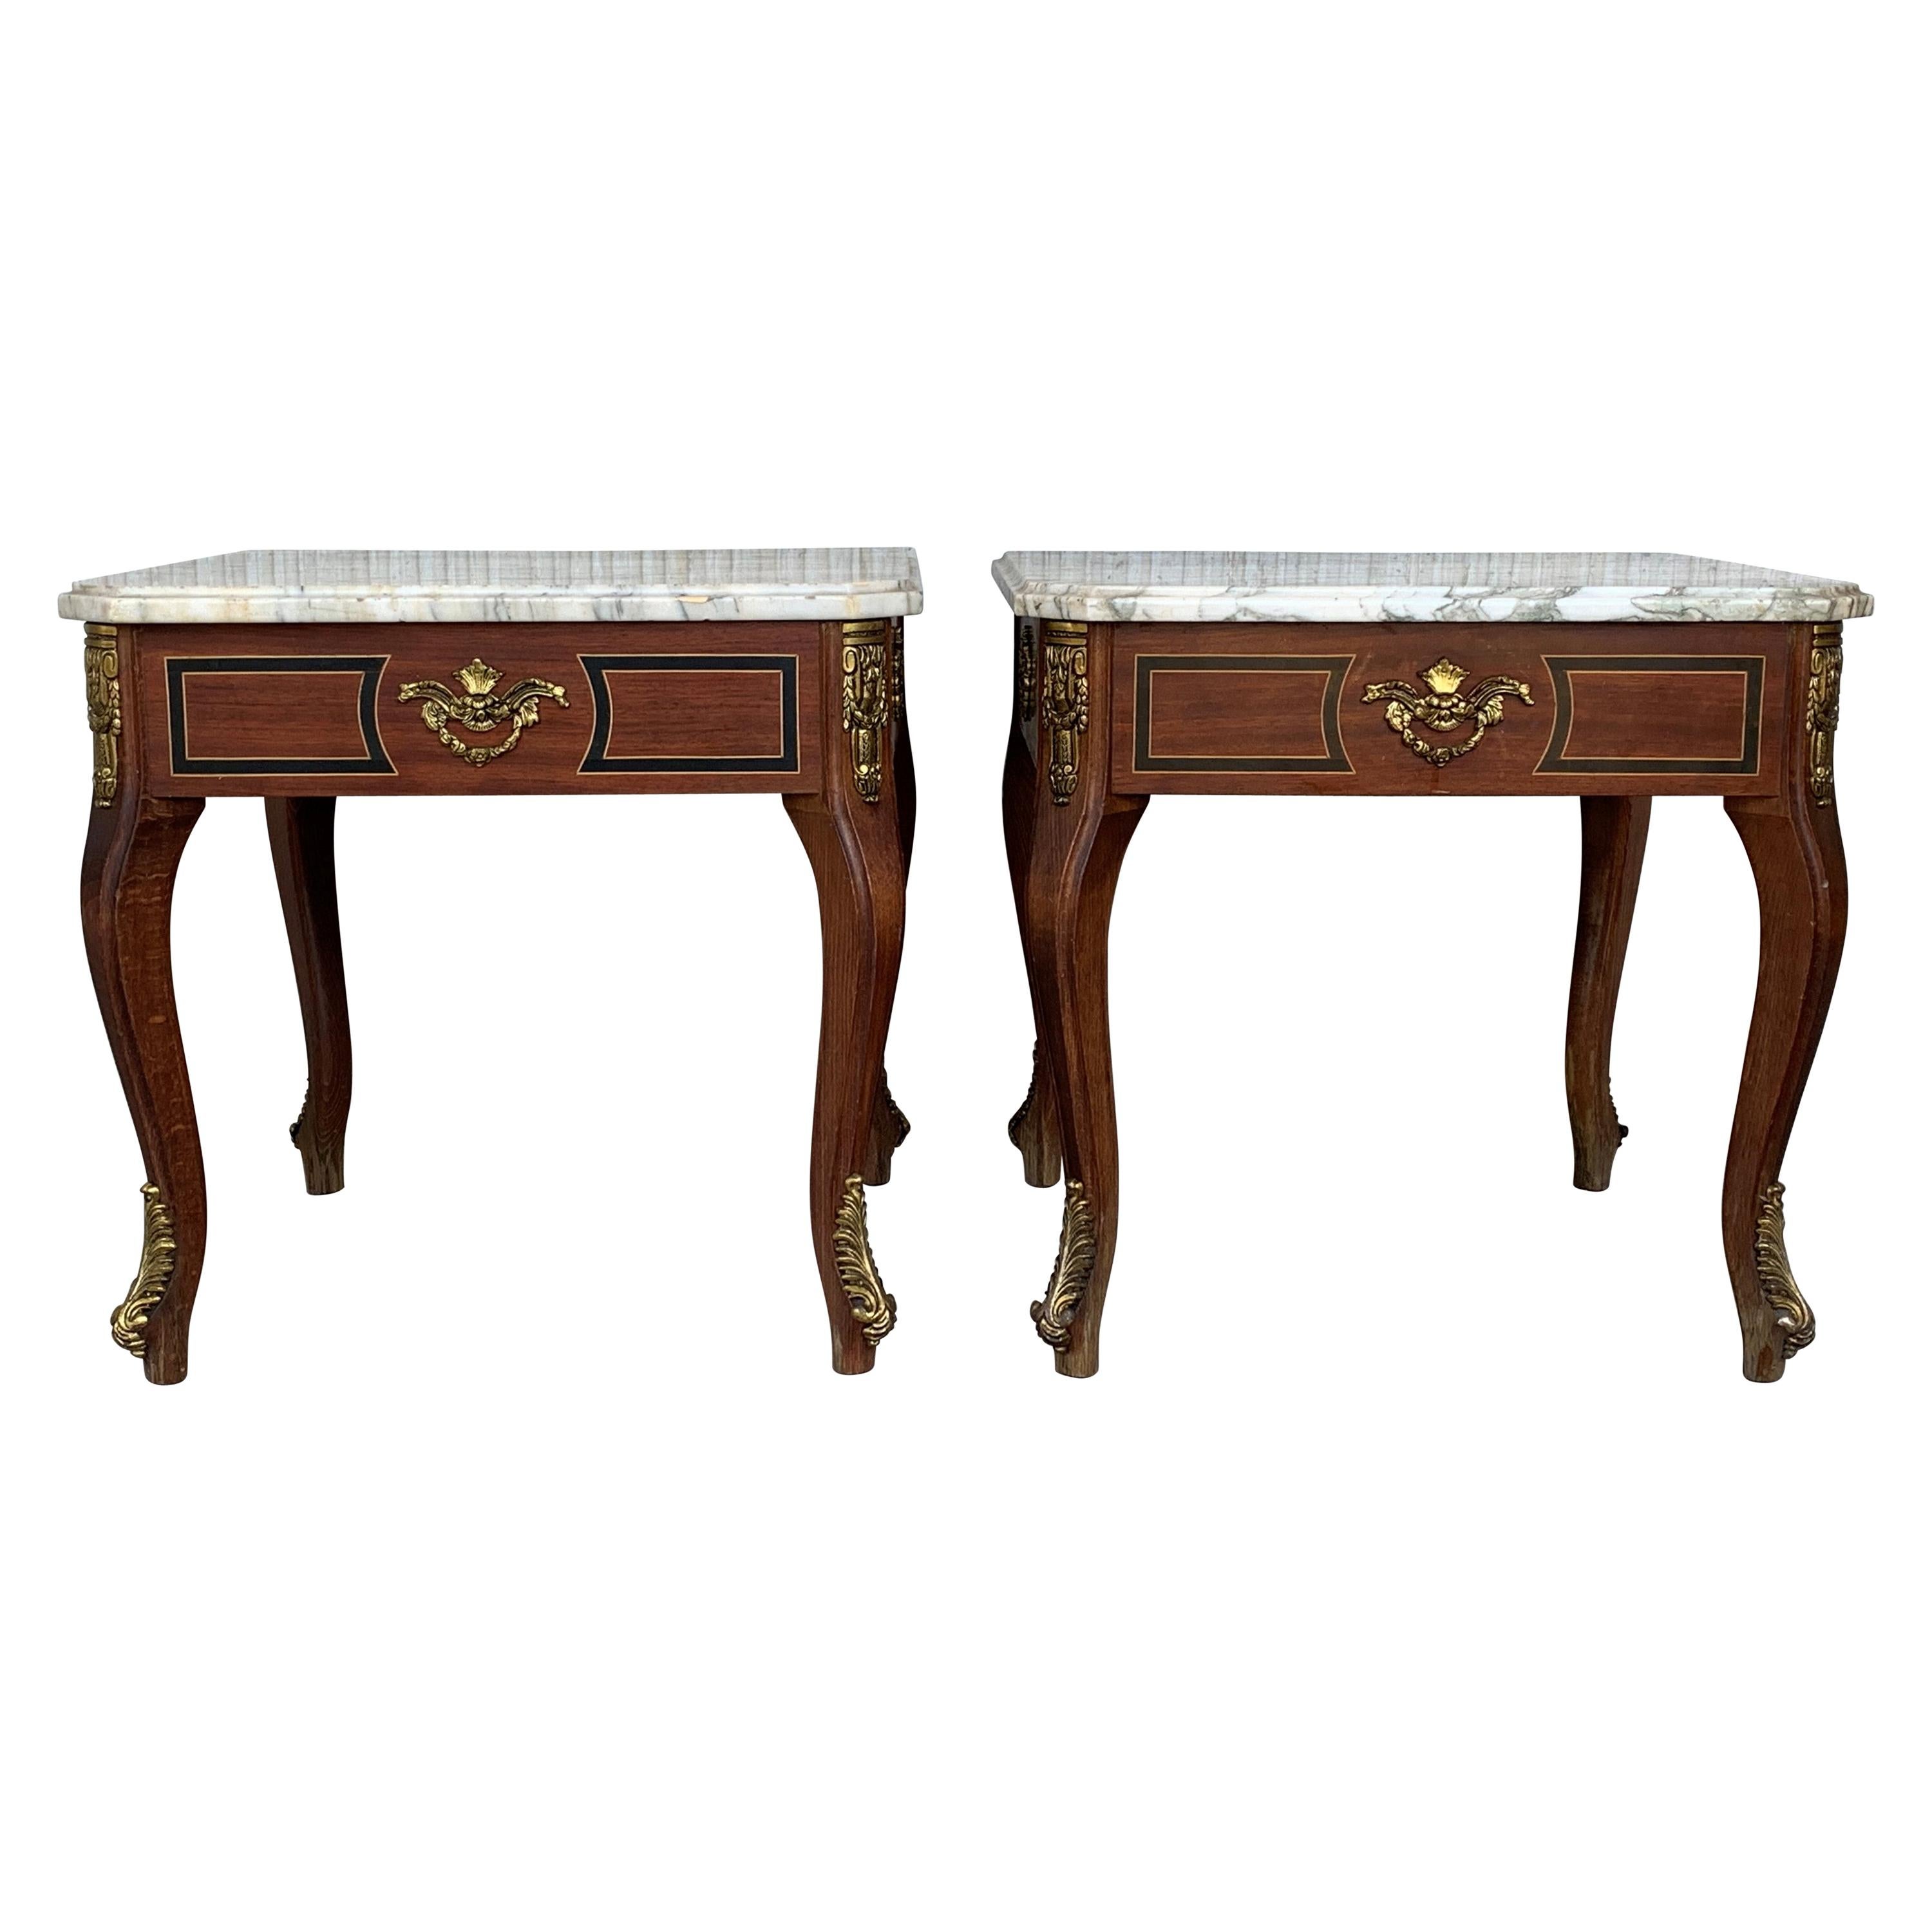 Pair of Louis XV Style Mahogany and Marble-Top Coffee Table with Bronze